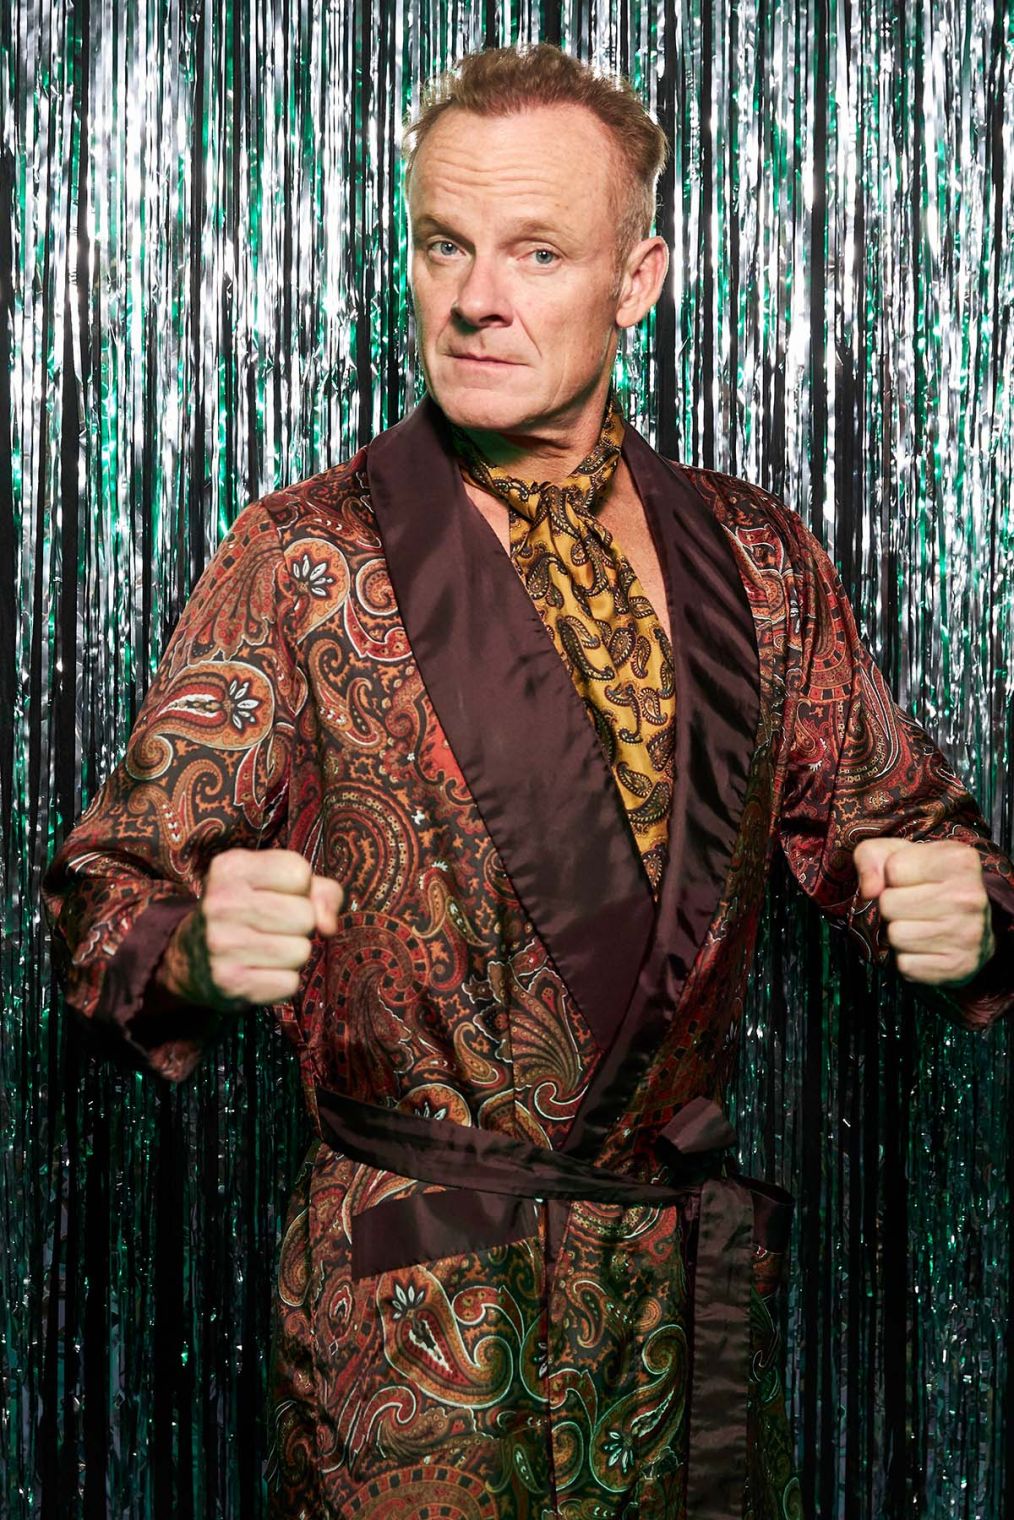 Alistair Petrie stars in new ITV2 sitcom Deep Heat starting Monday 28th March at 10pm